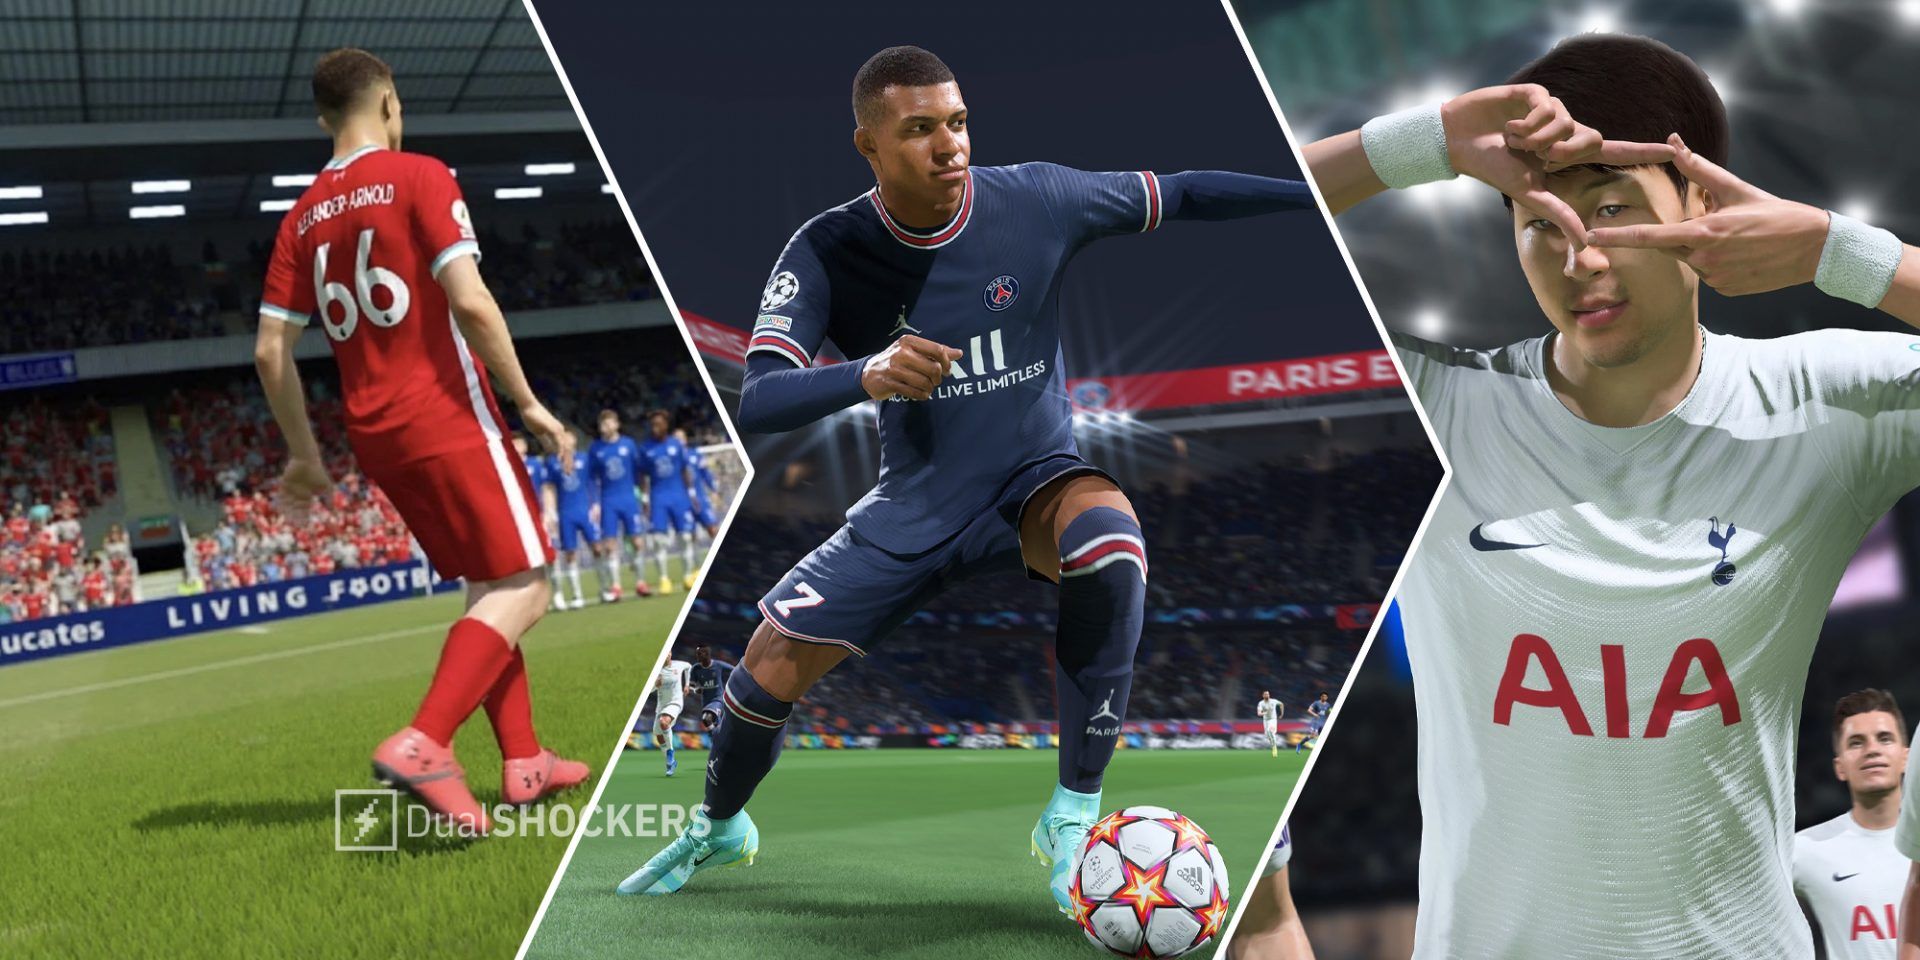 FIFA player about to kick on left, FIFA 22 player running with the soccer ball in middle, player posing after scoring a goal on right